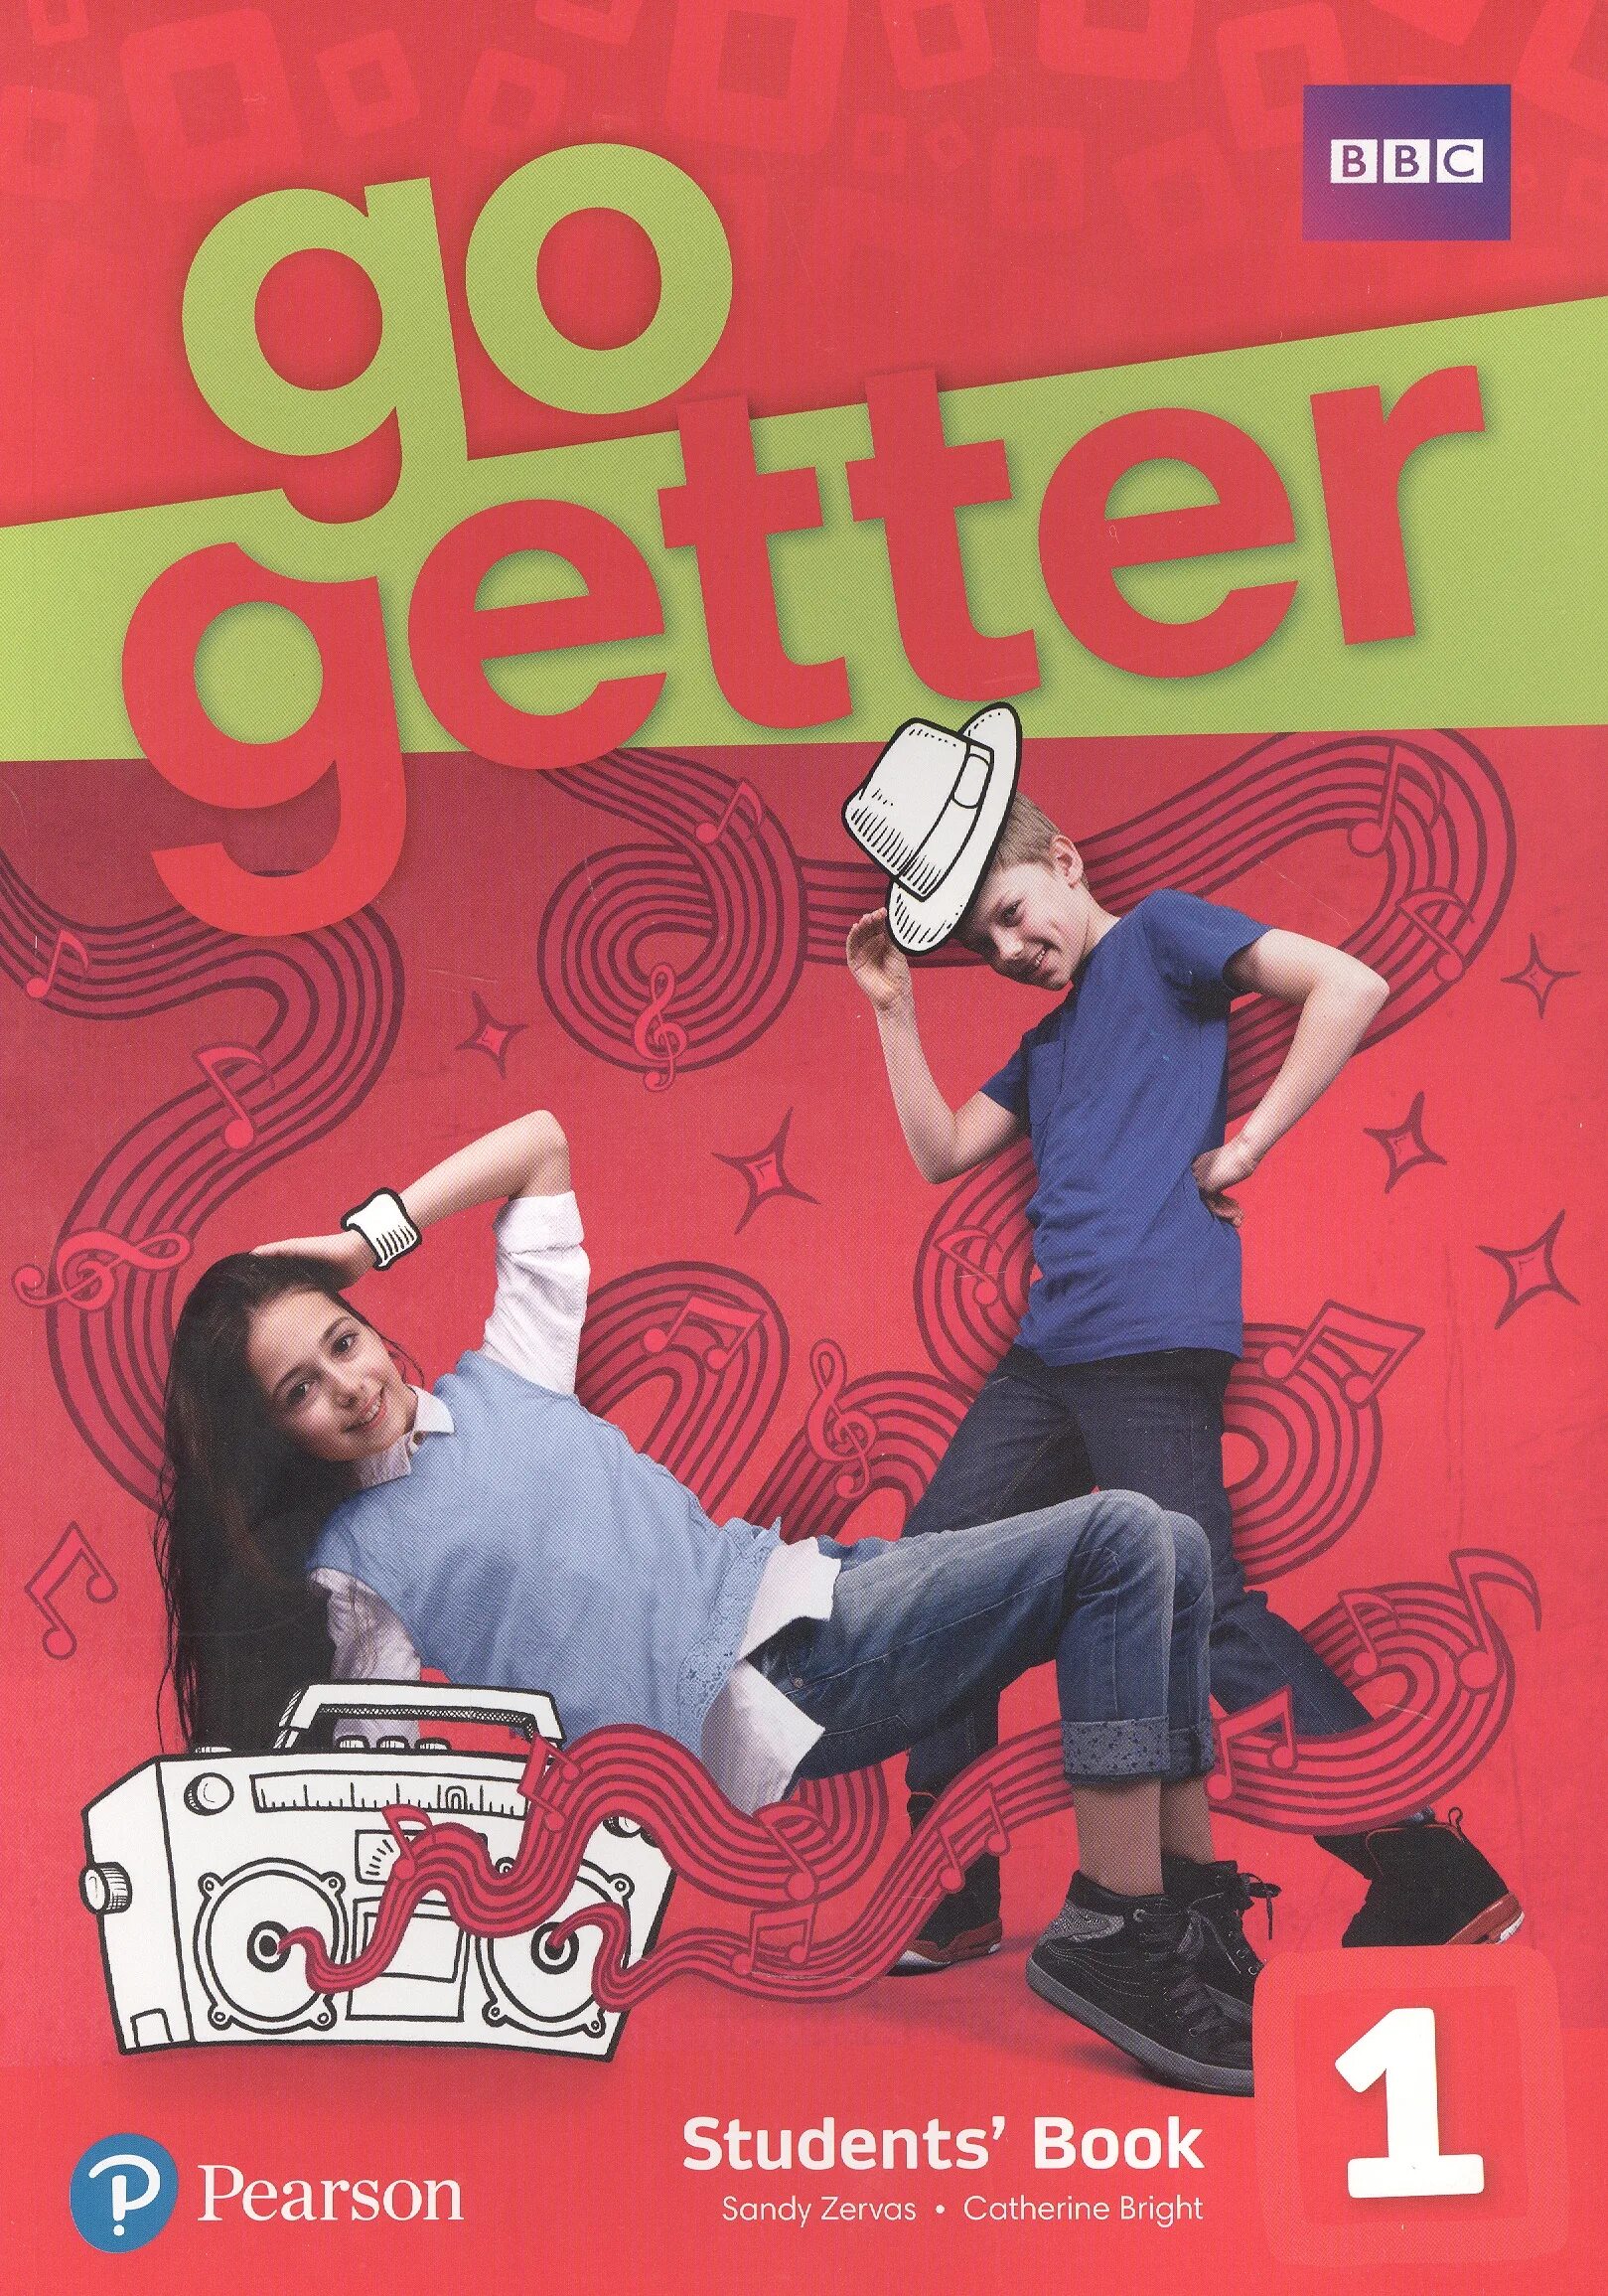 Go getter 6.2. Go Getter 1 student’s book учебник. Go Getter 3 student's book Workbook. Go Getter 1. Учебник Pearson go Getter.